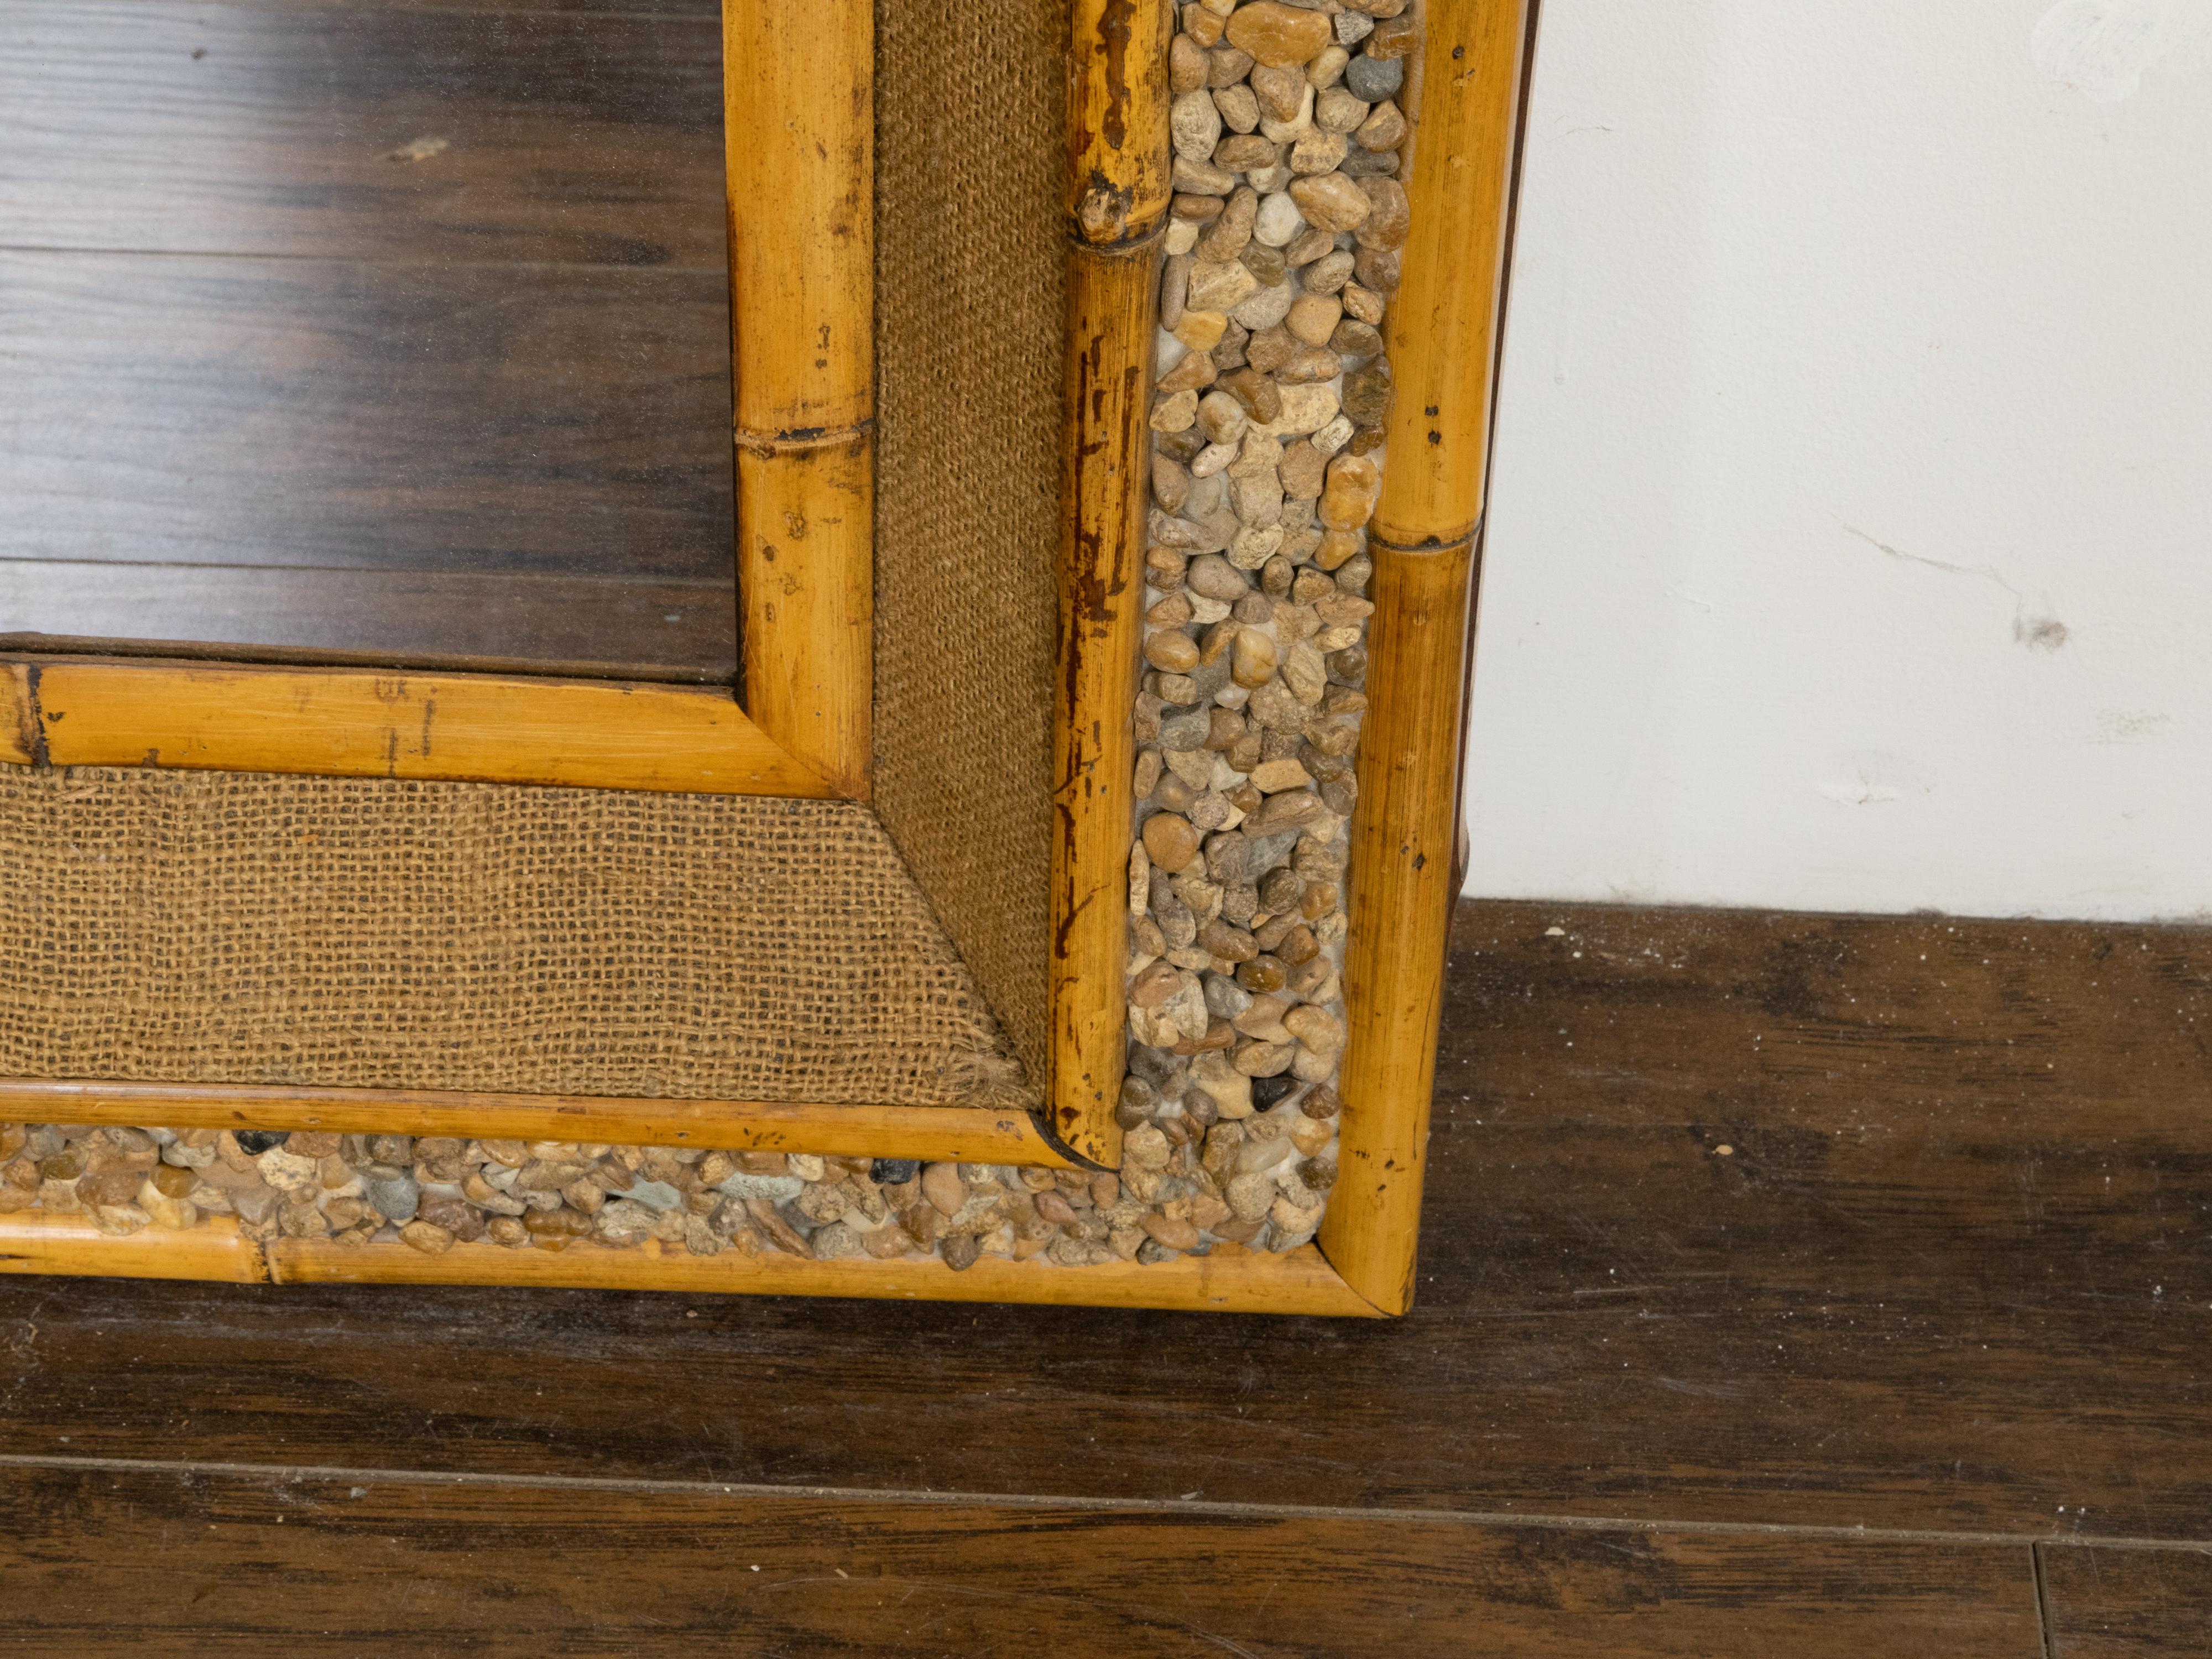 English Bamboo, Rocks and Burlap Rectangular Mirror from the Mid-Century Period For Sale 1